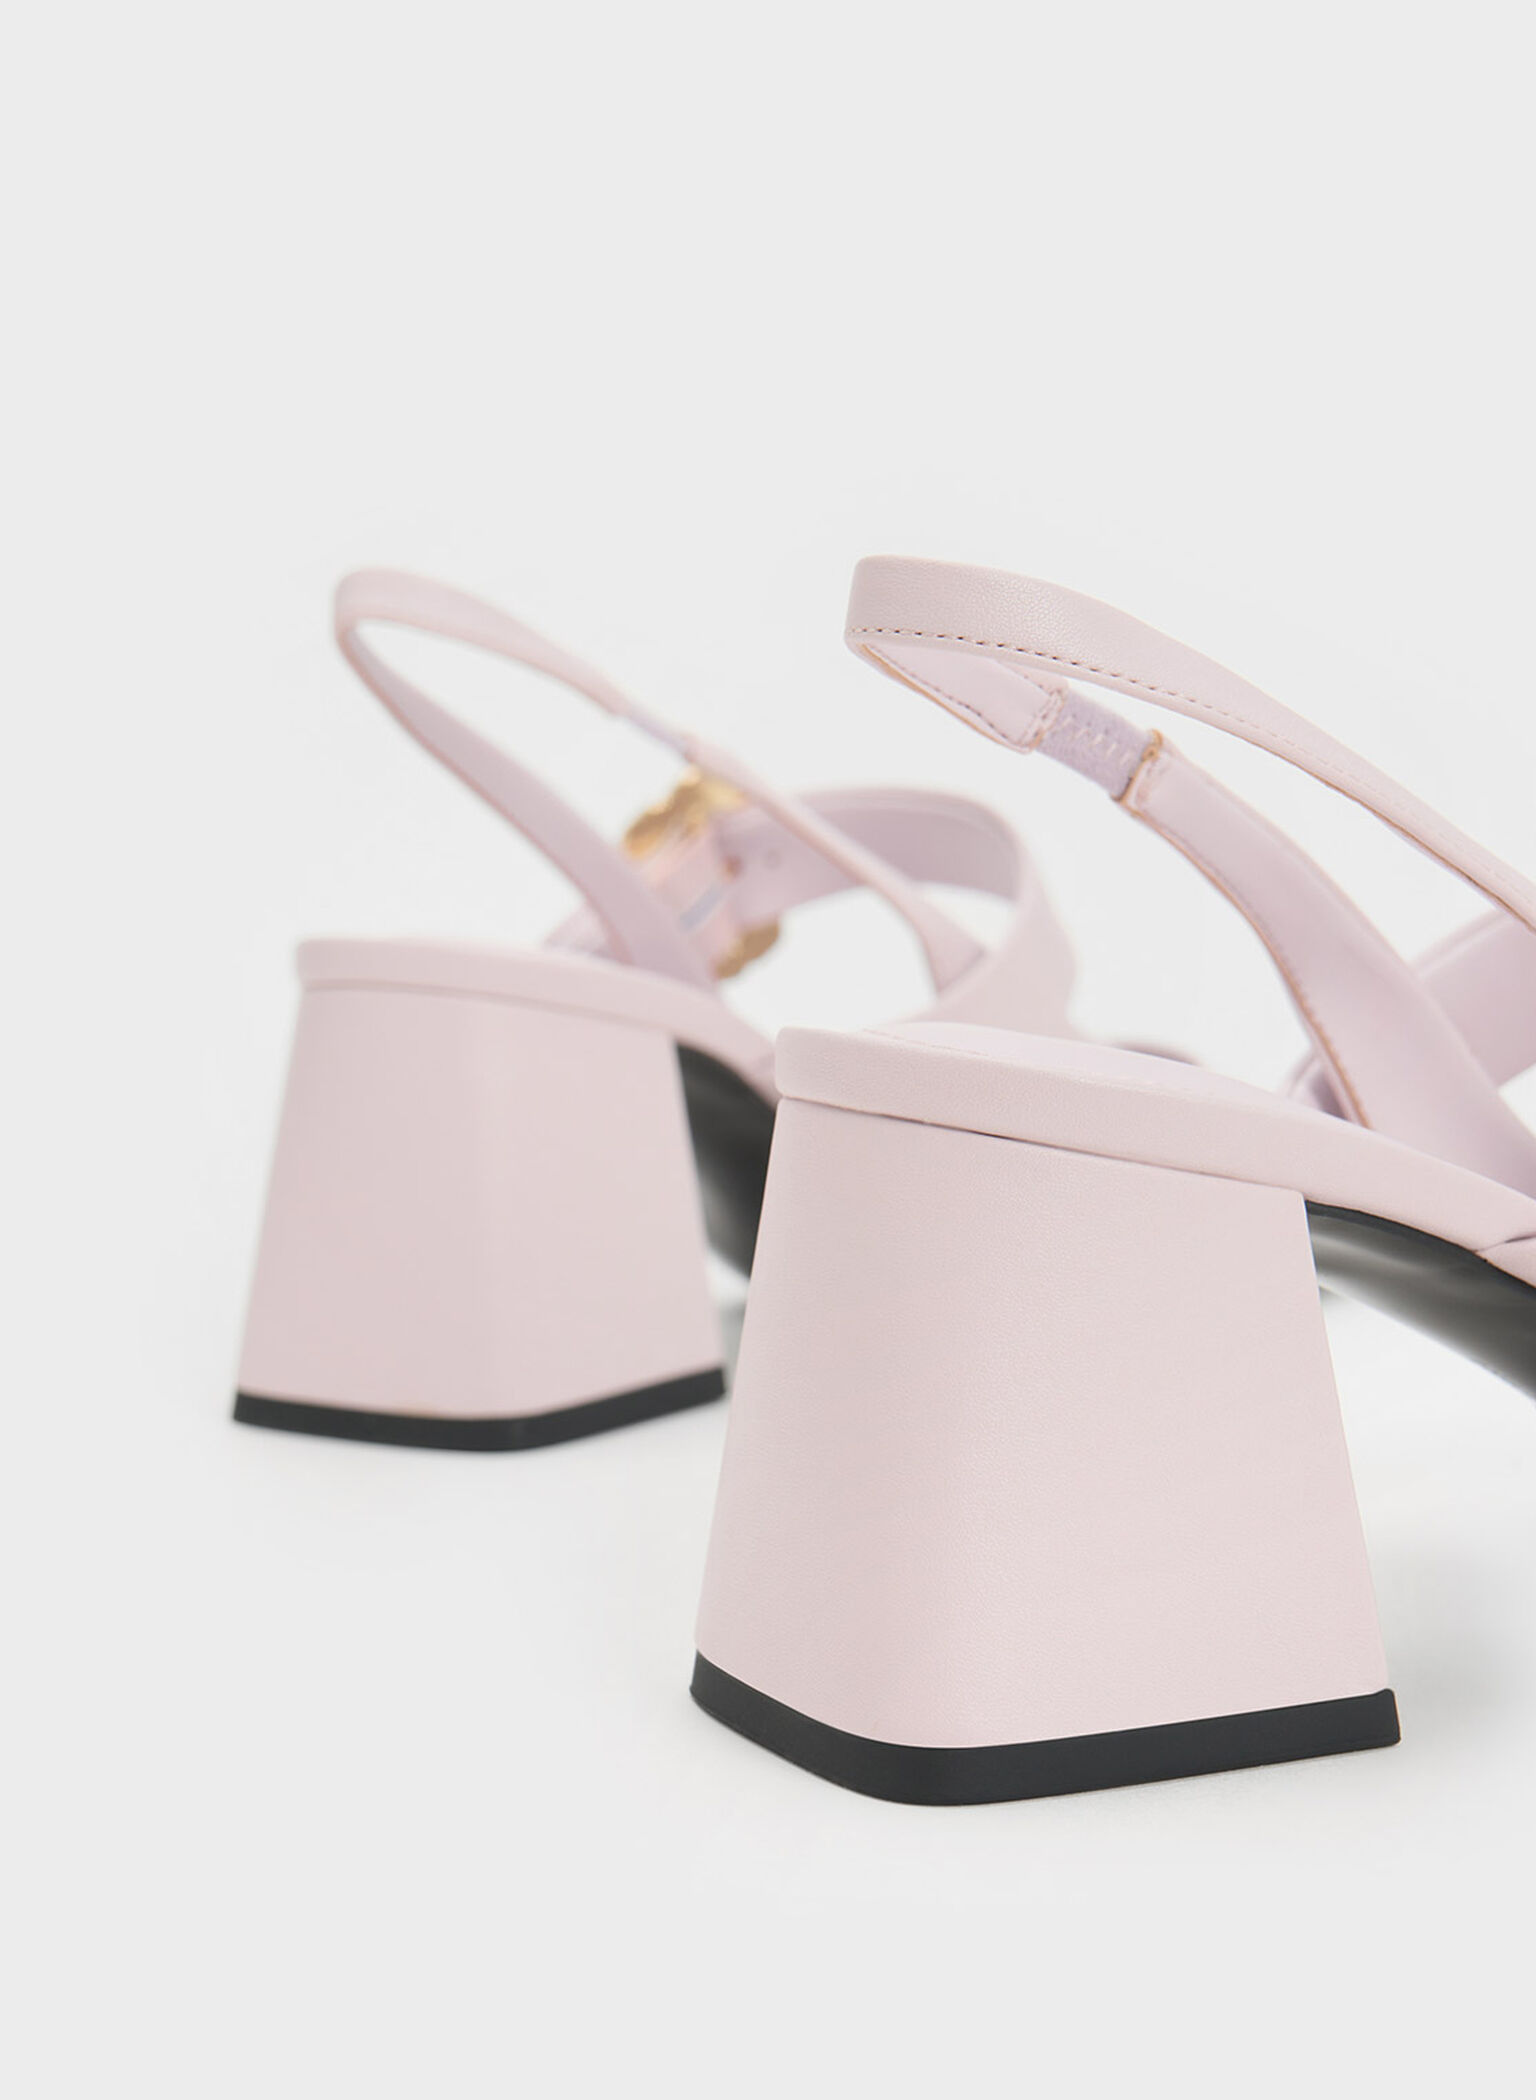 Patent Two-Tone Pearl Buckle Slingback Pumps, Lilac, hi-res